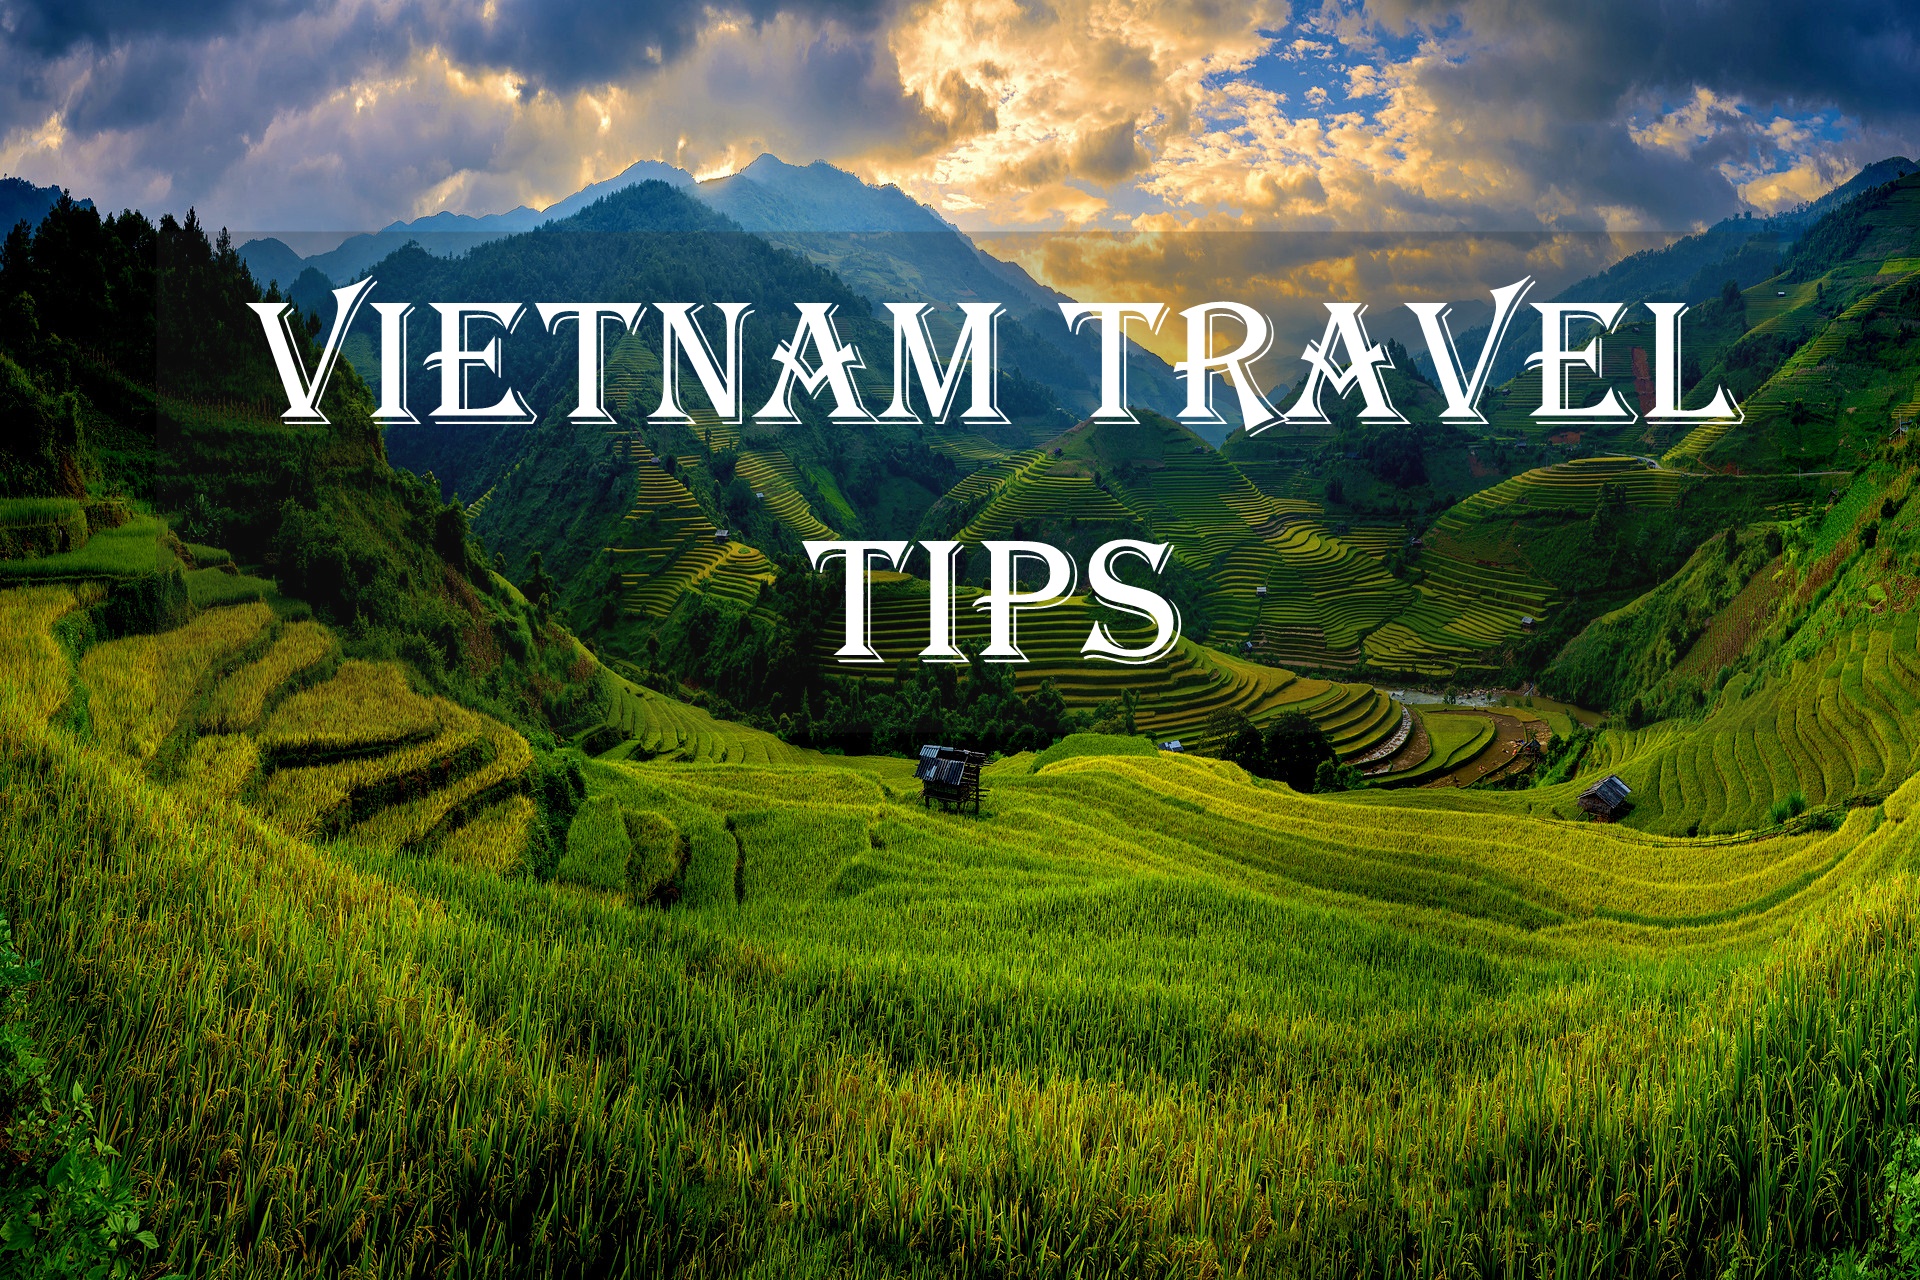 Vietnam Travel Tips 14 things you must know before traveling to